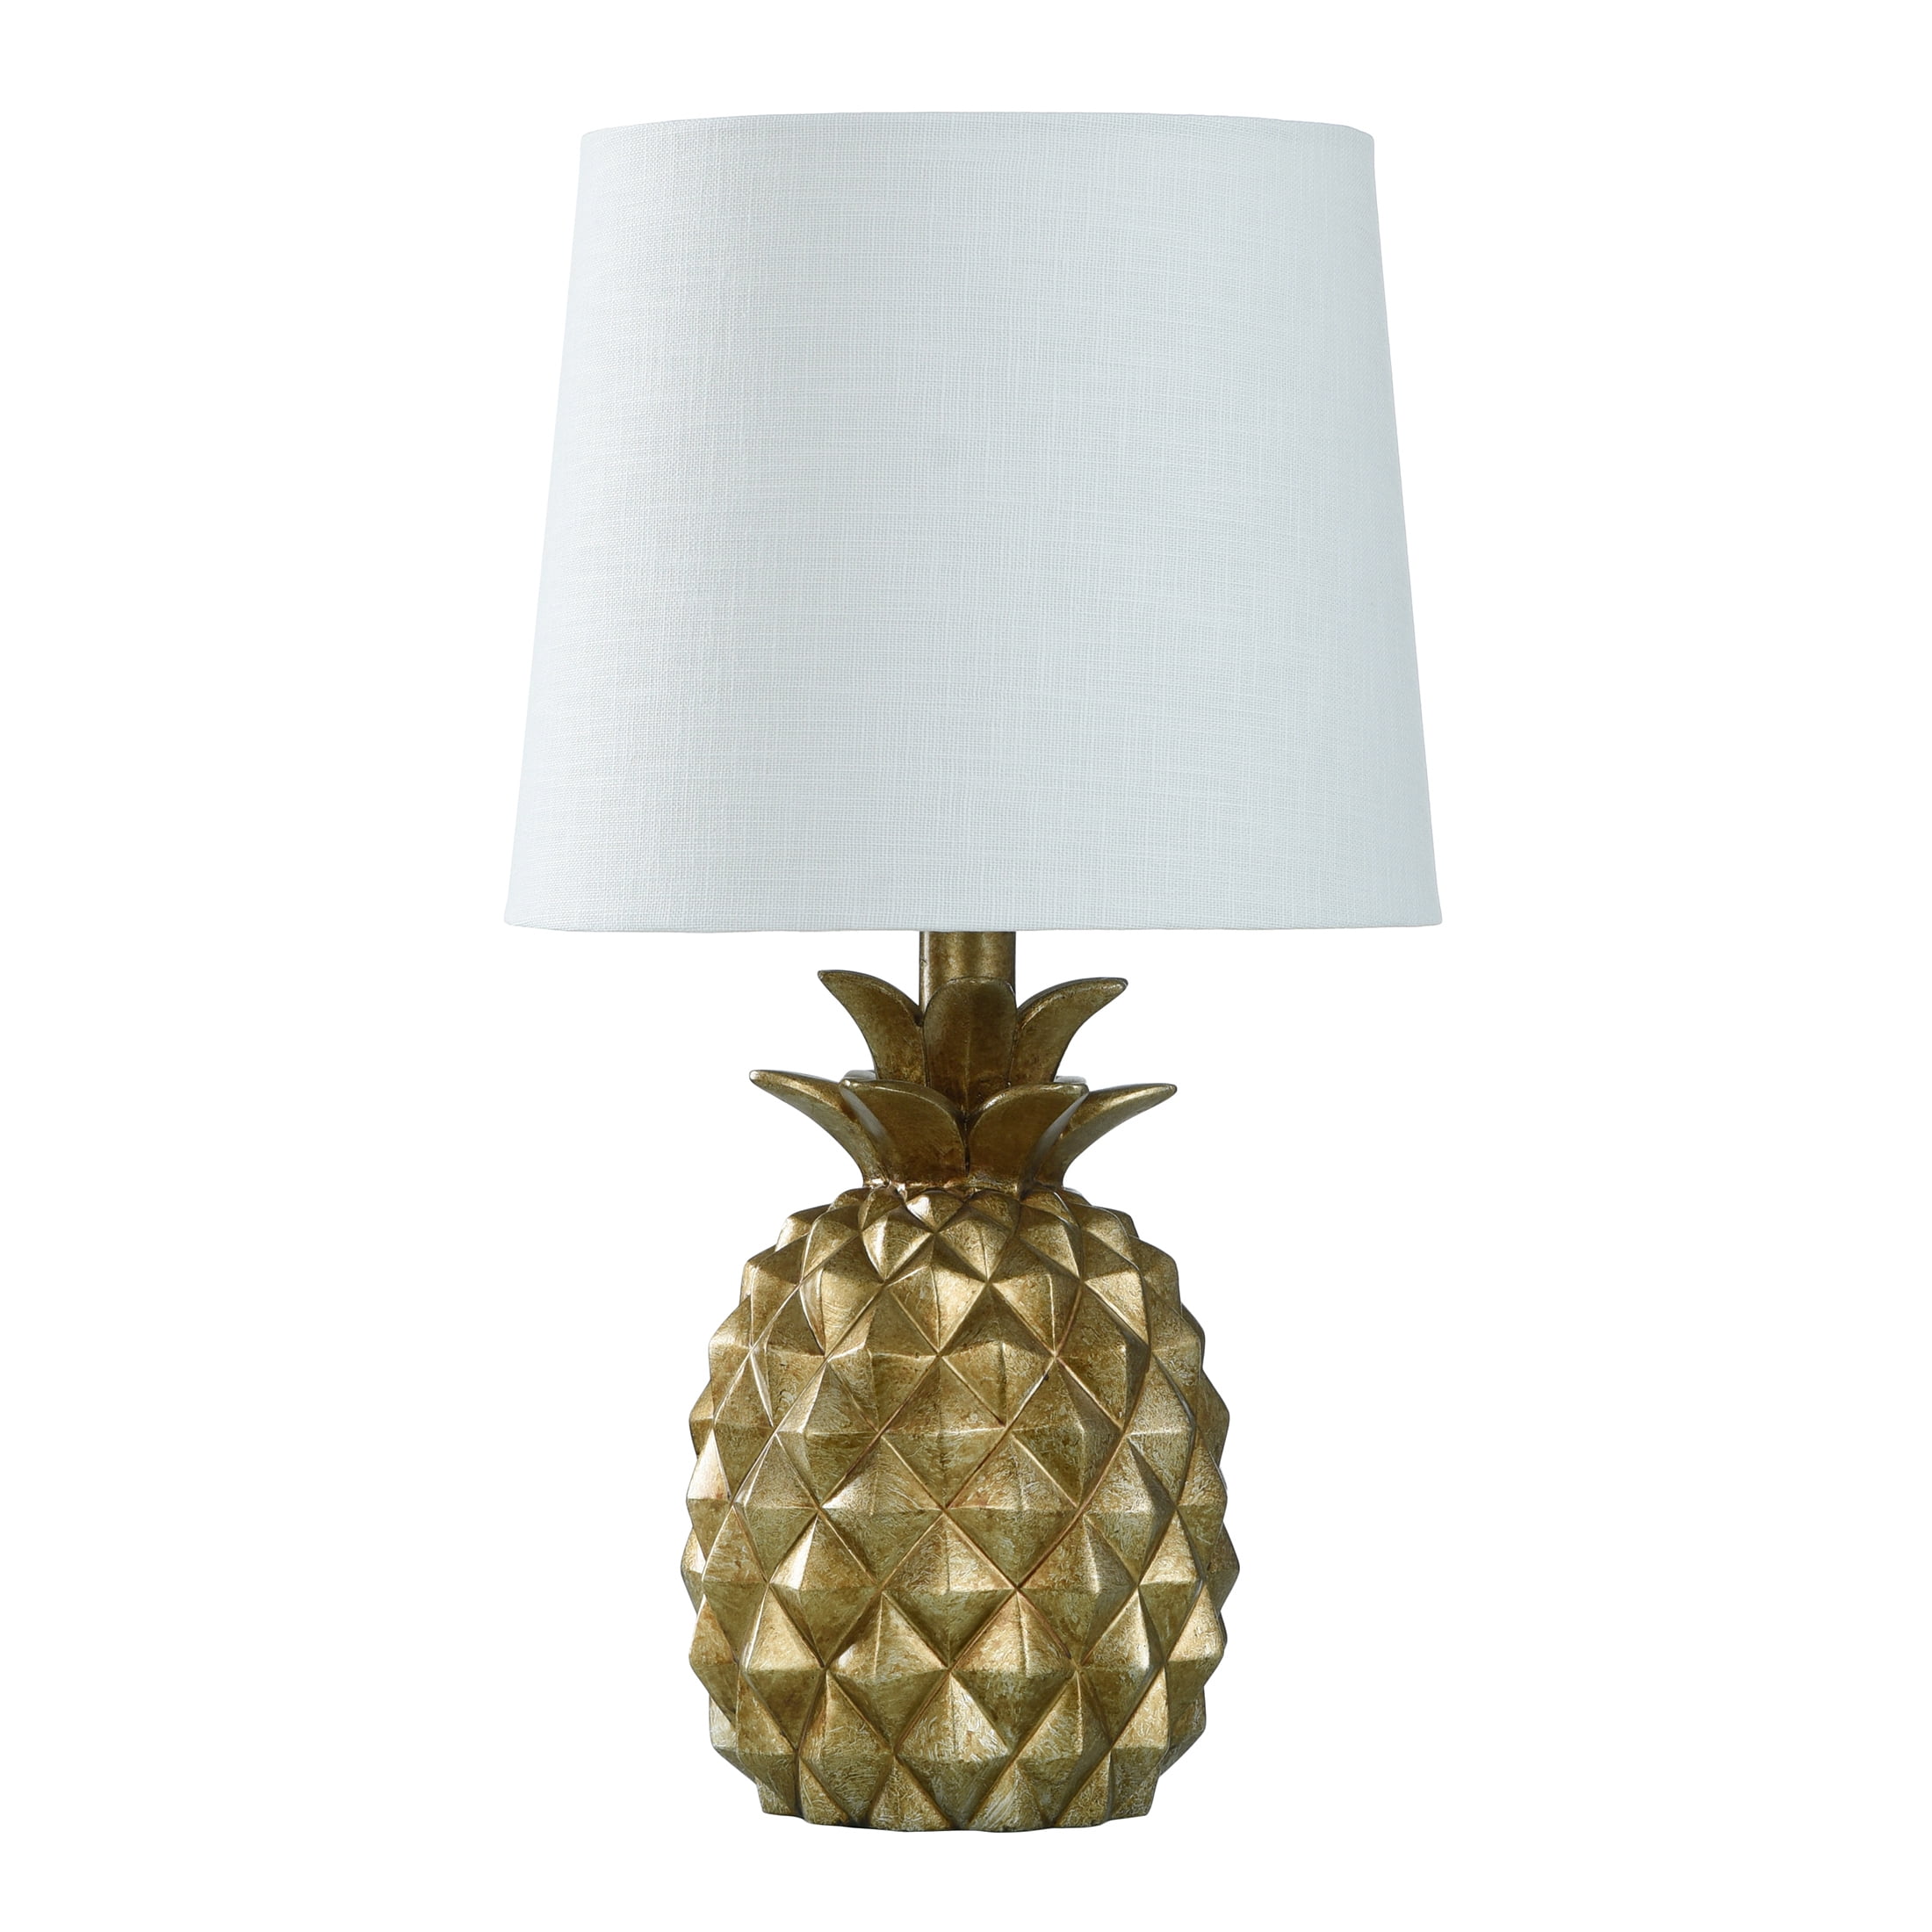 Mainstays Distressed Pineapple 17” Table Lamp with Empire-Style Shade, Textured Gold